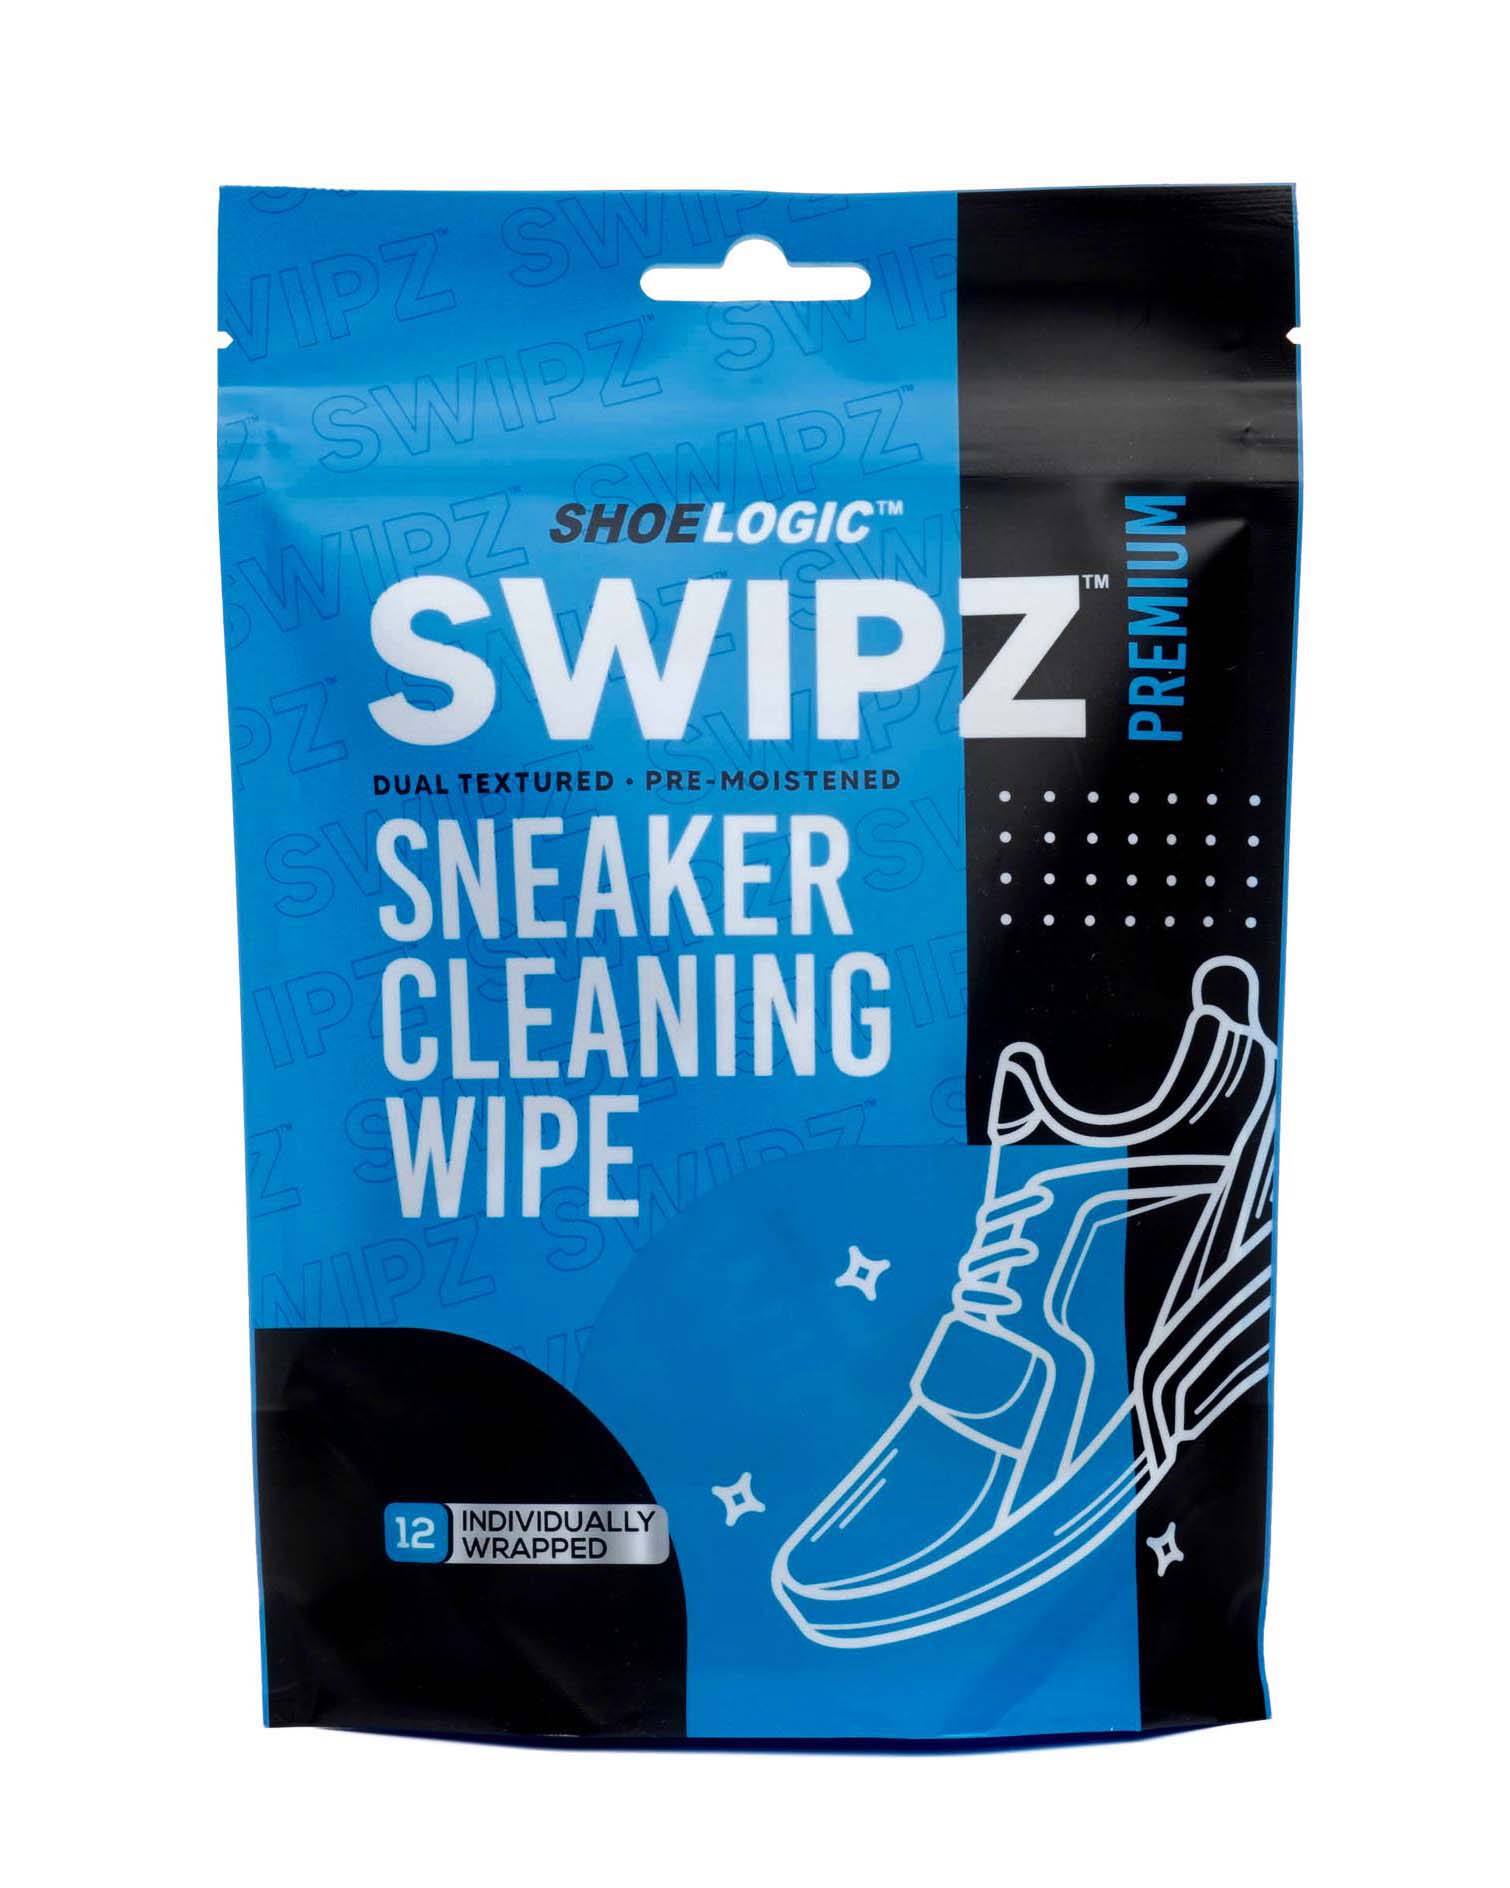 Swipz Premium Sneaker Cleaning Wipes 12CT Individually Wrapped